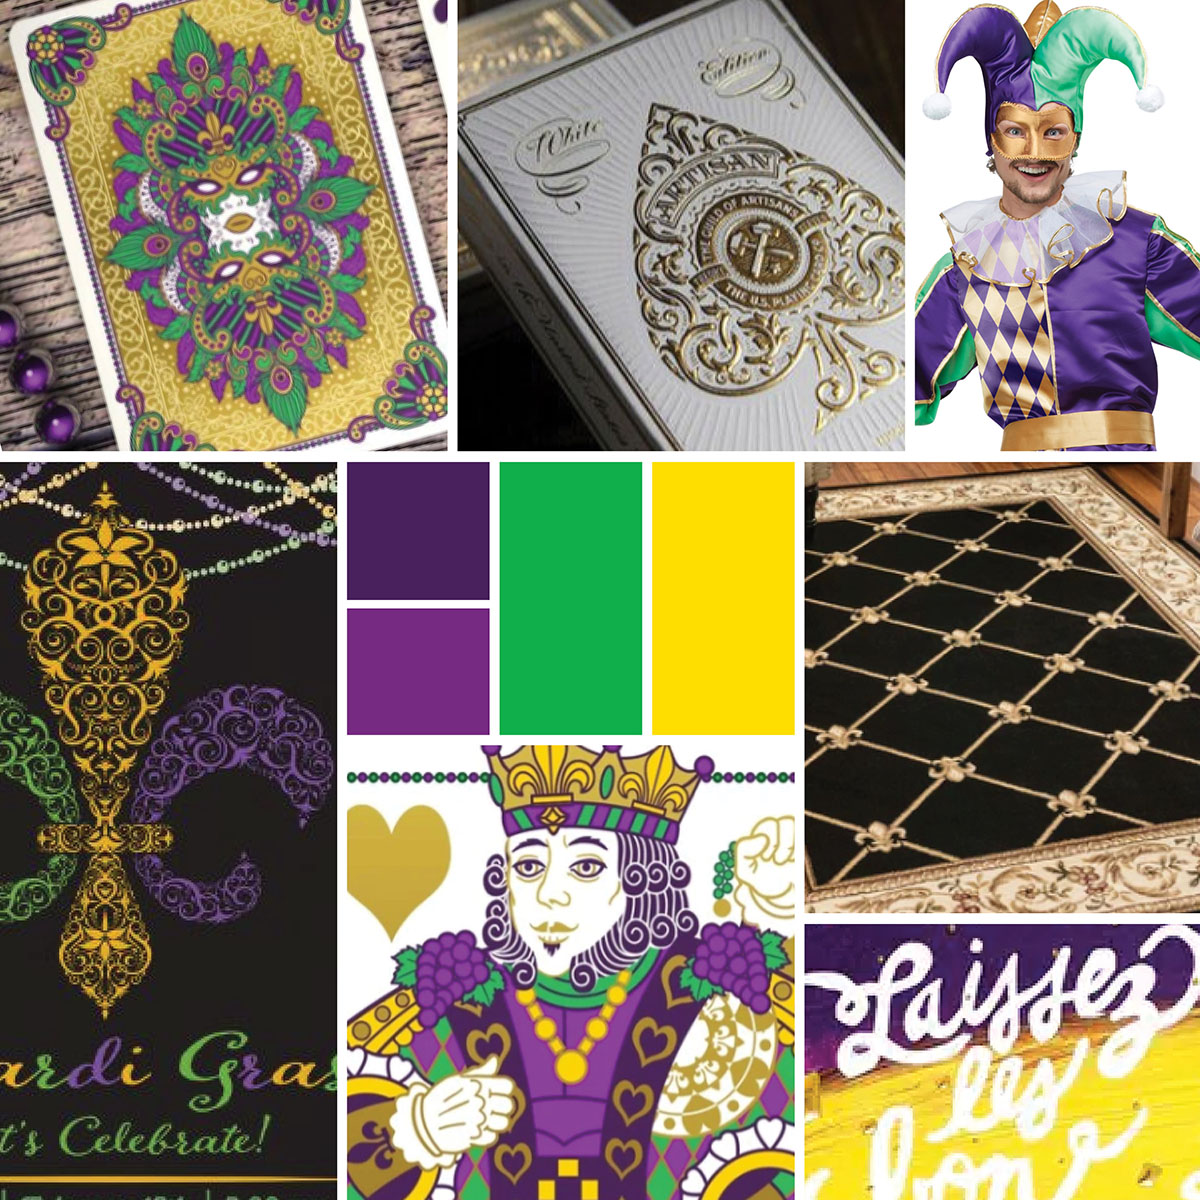 A collage of imagery that inspired the mardi gras invitation design. 